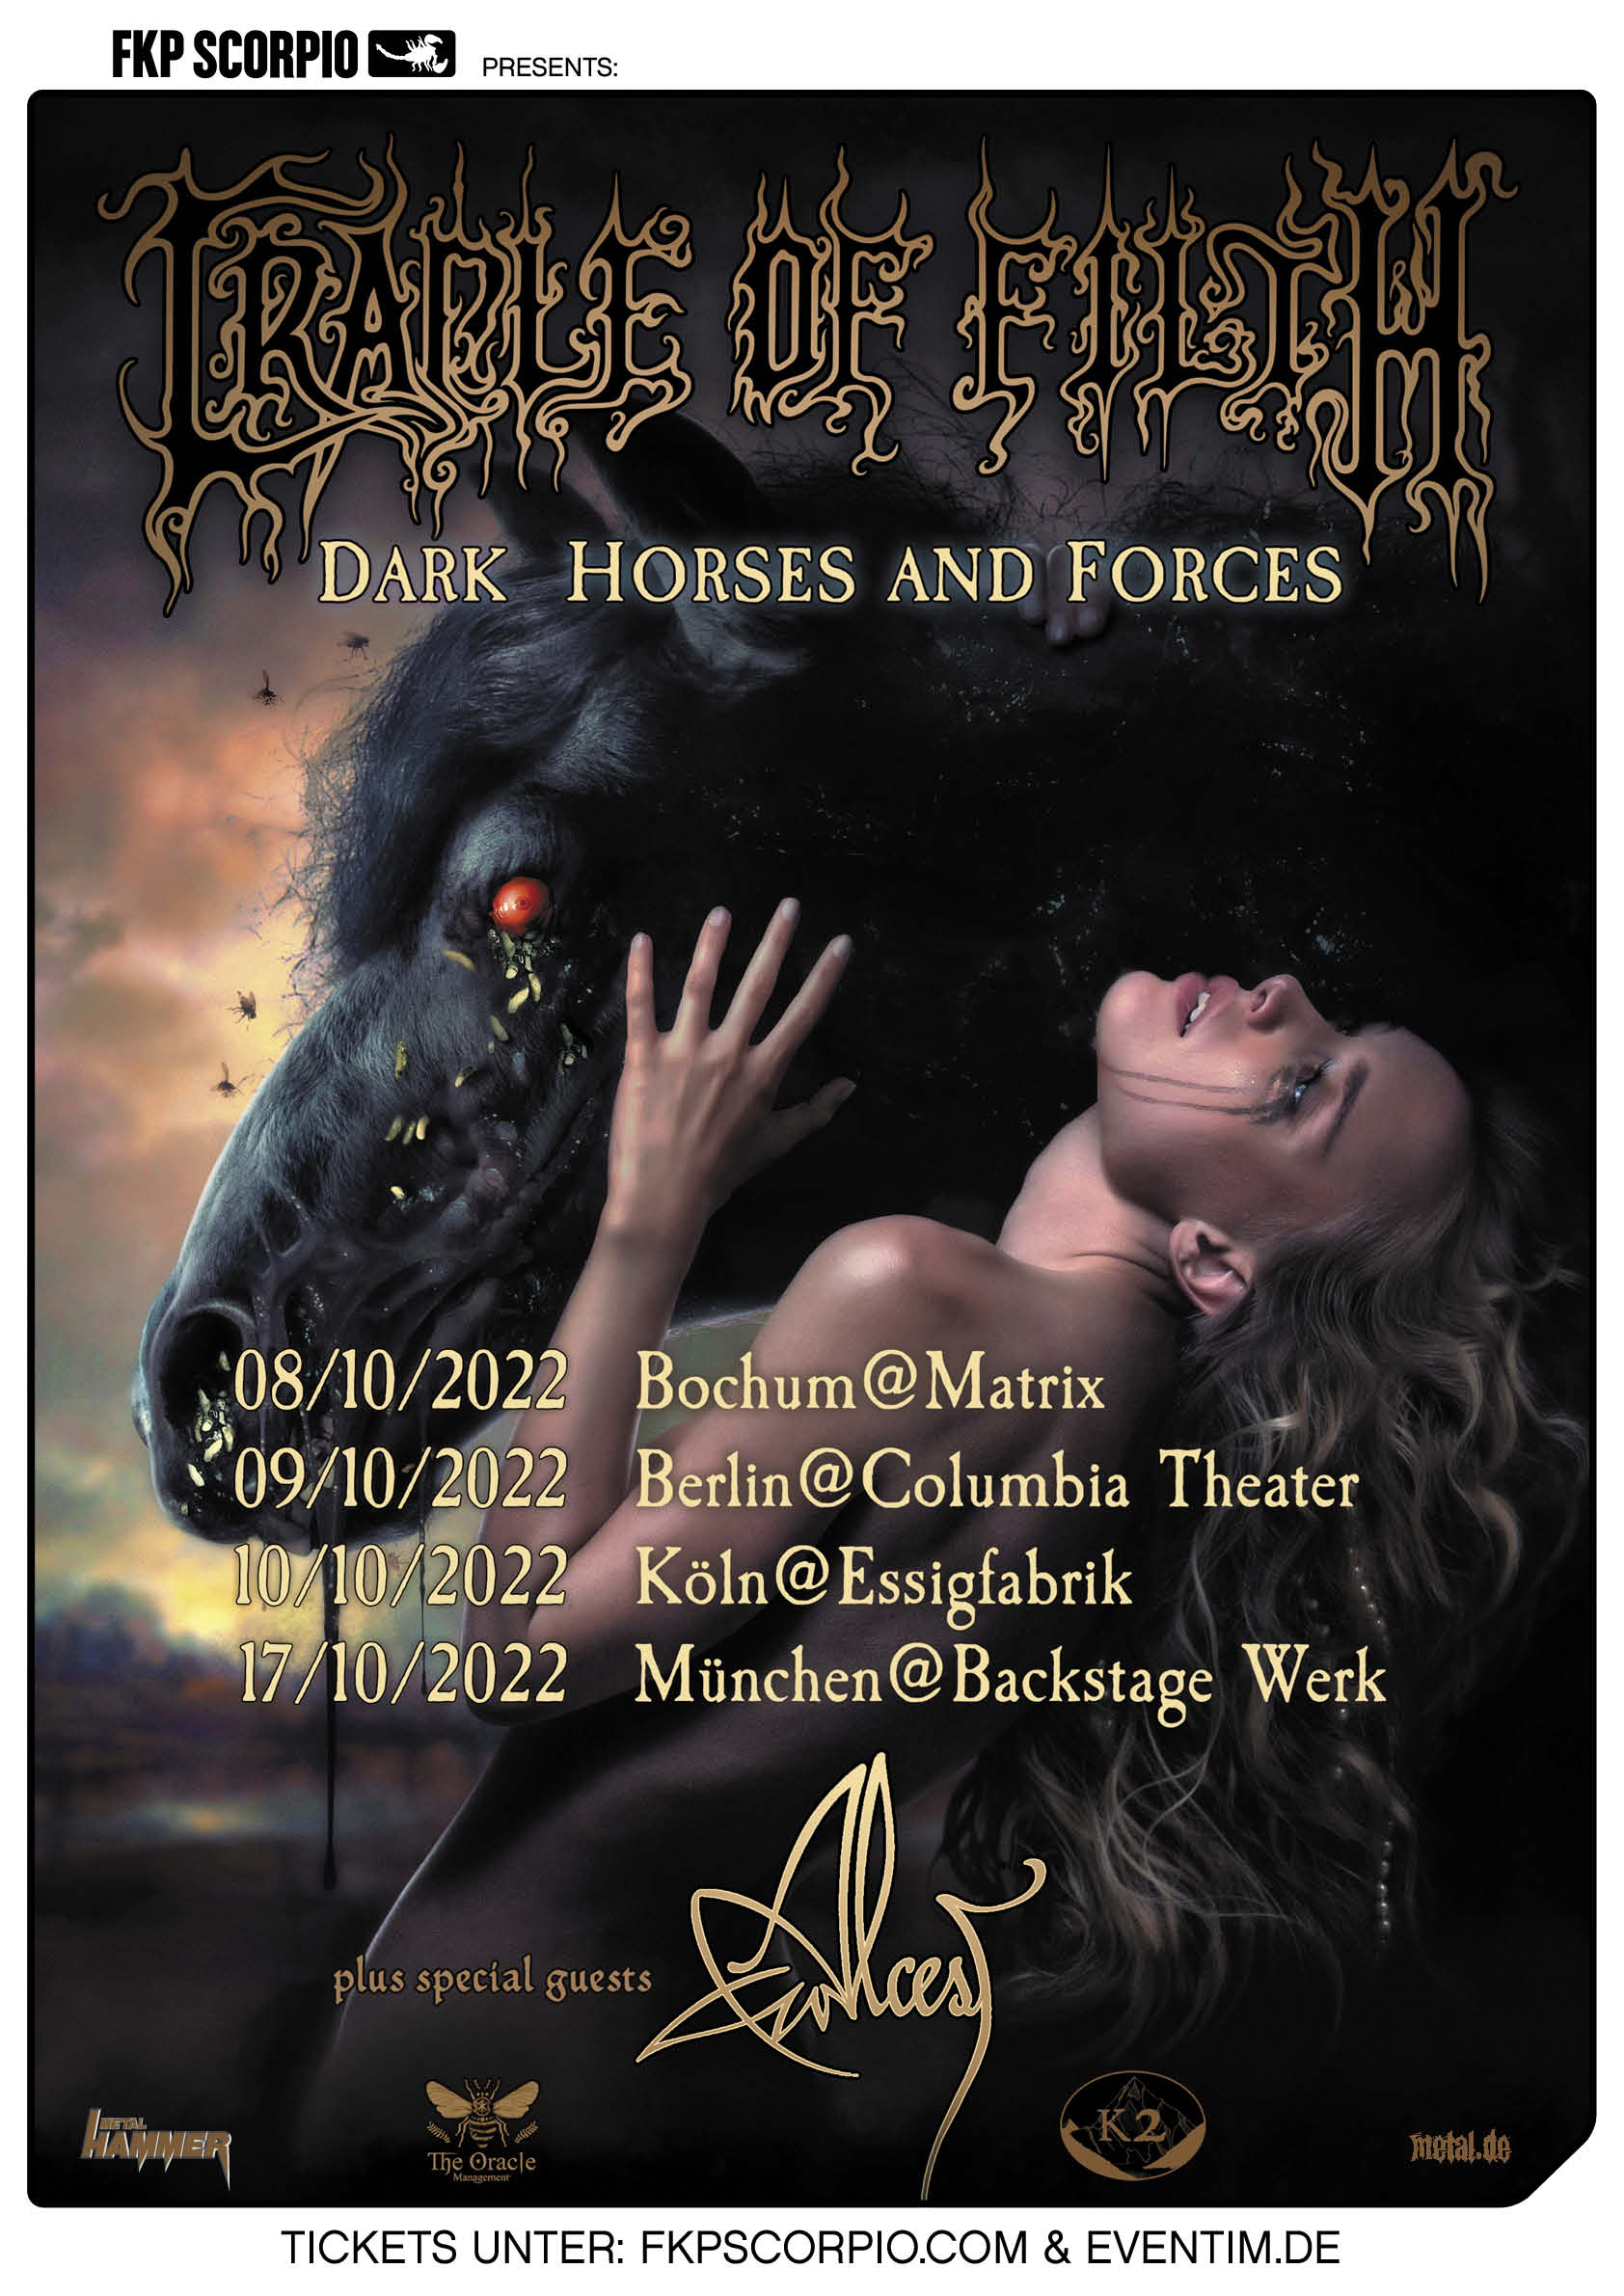 Cradle Of Filth - Dark Horses And Forces Tourplakat